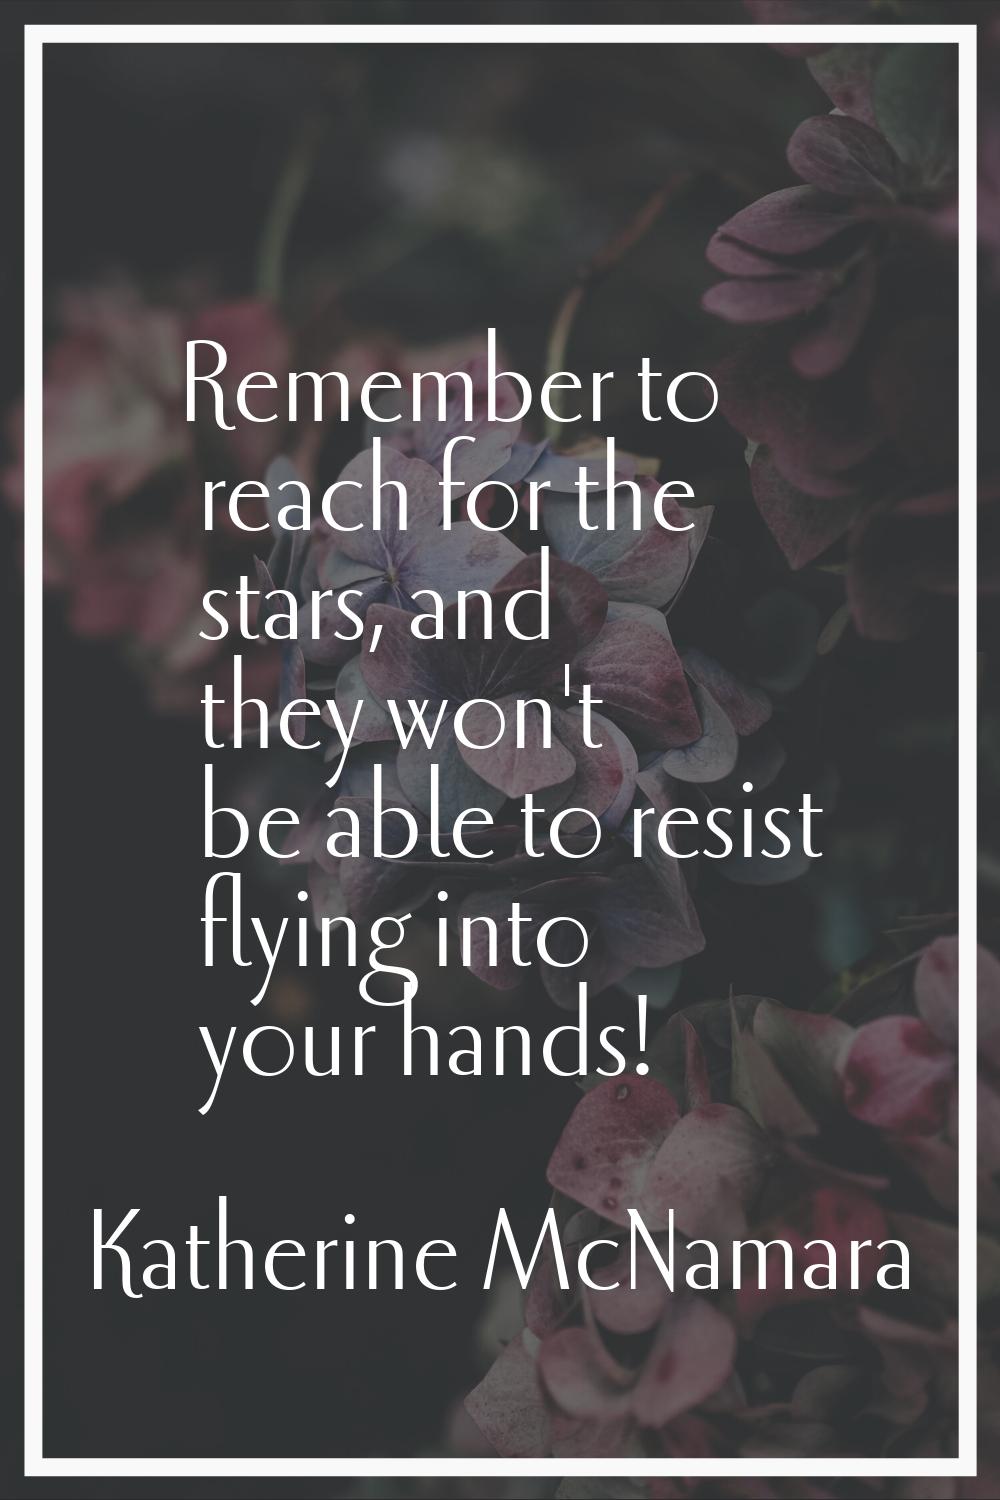 Remember to reach for the stars, and they won't be able to resist flying into your hands!